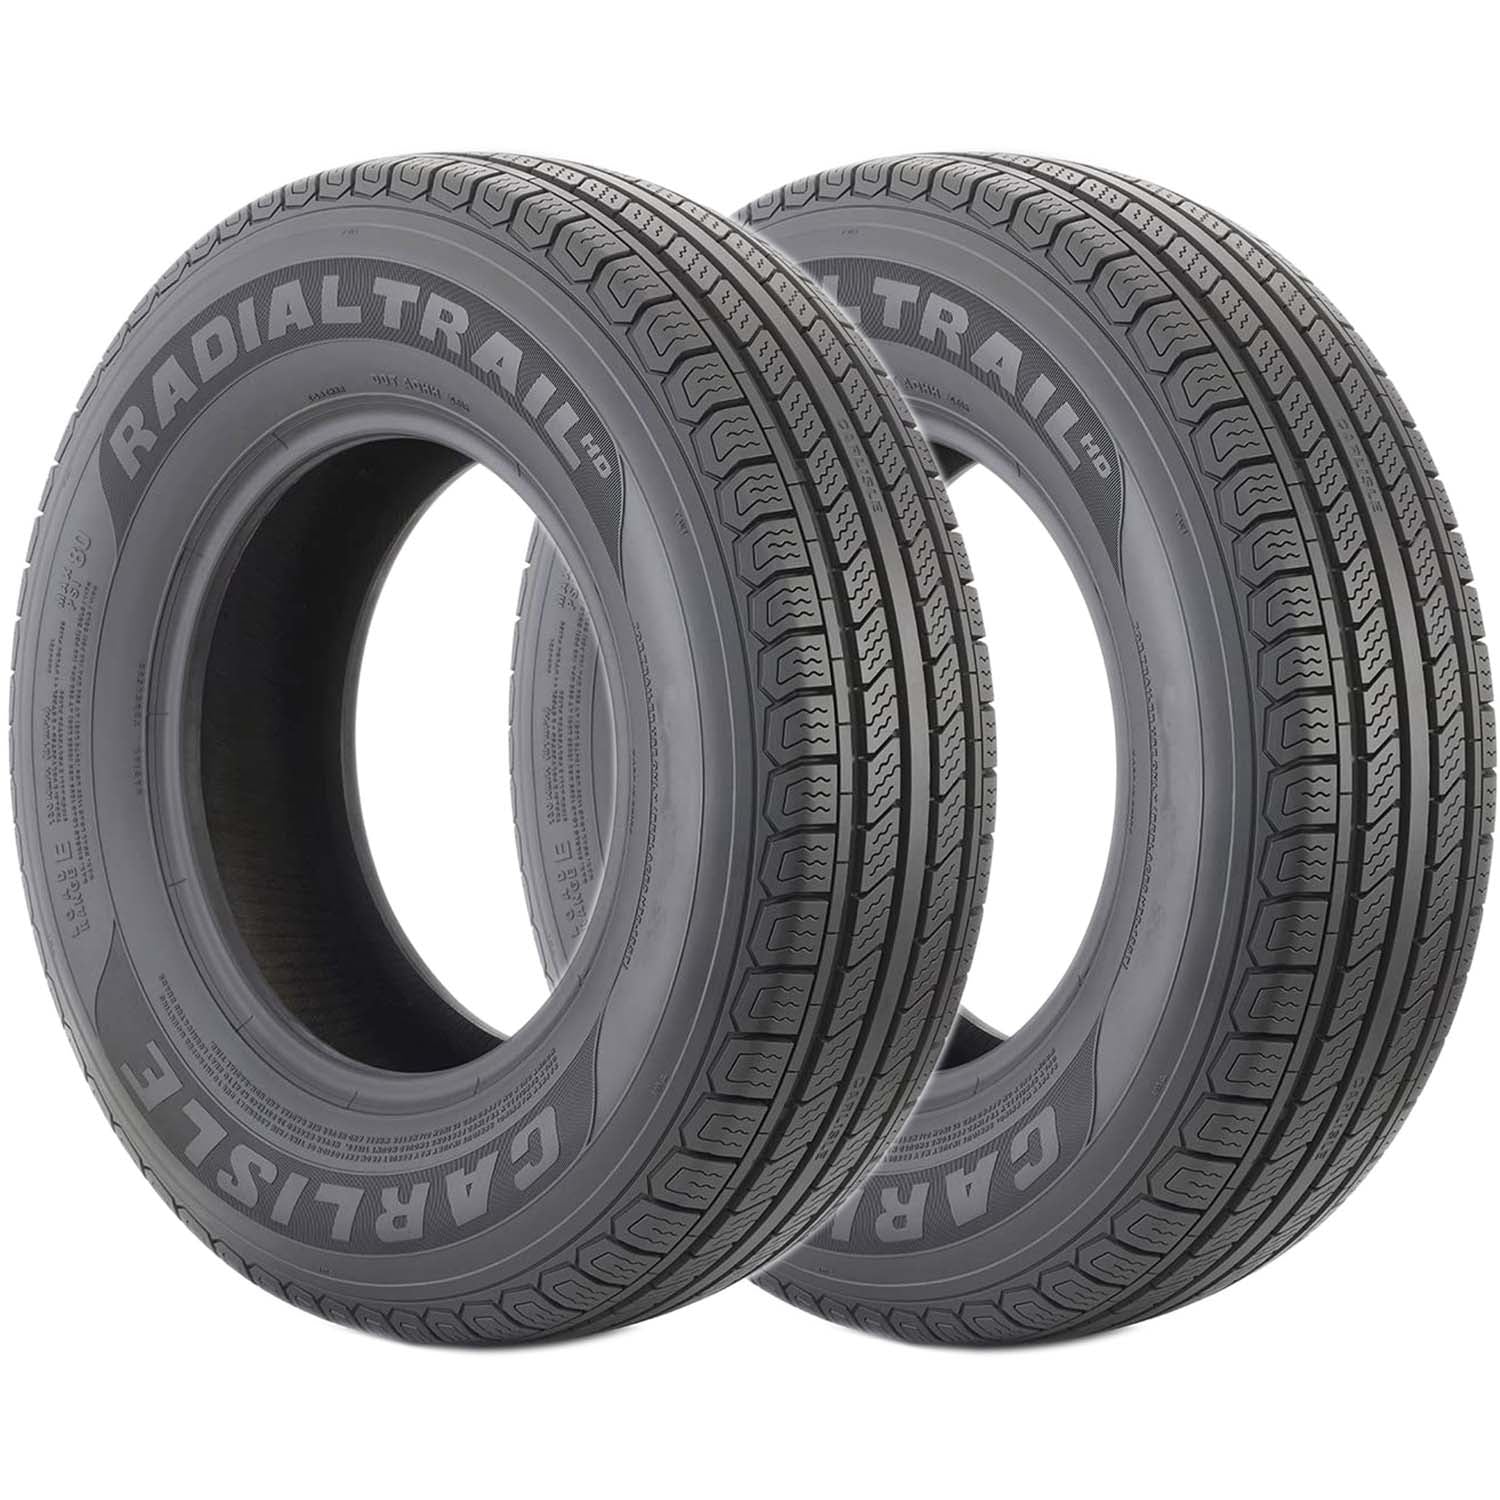 Carlisle Radial Trail HD Trailer Tire LRD 8ply ST185/80R13 Pack of 2